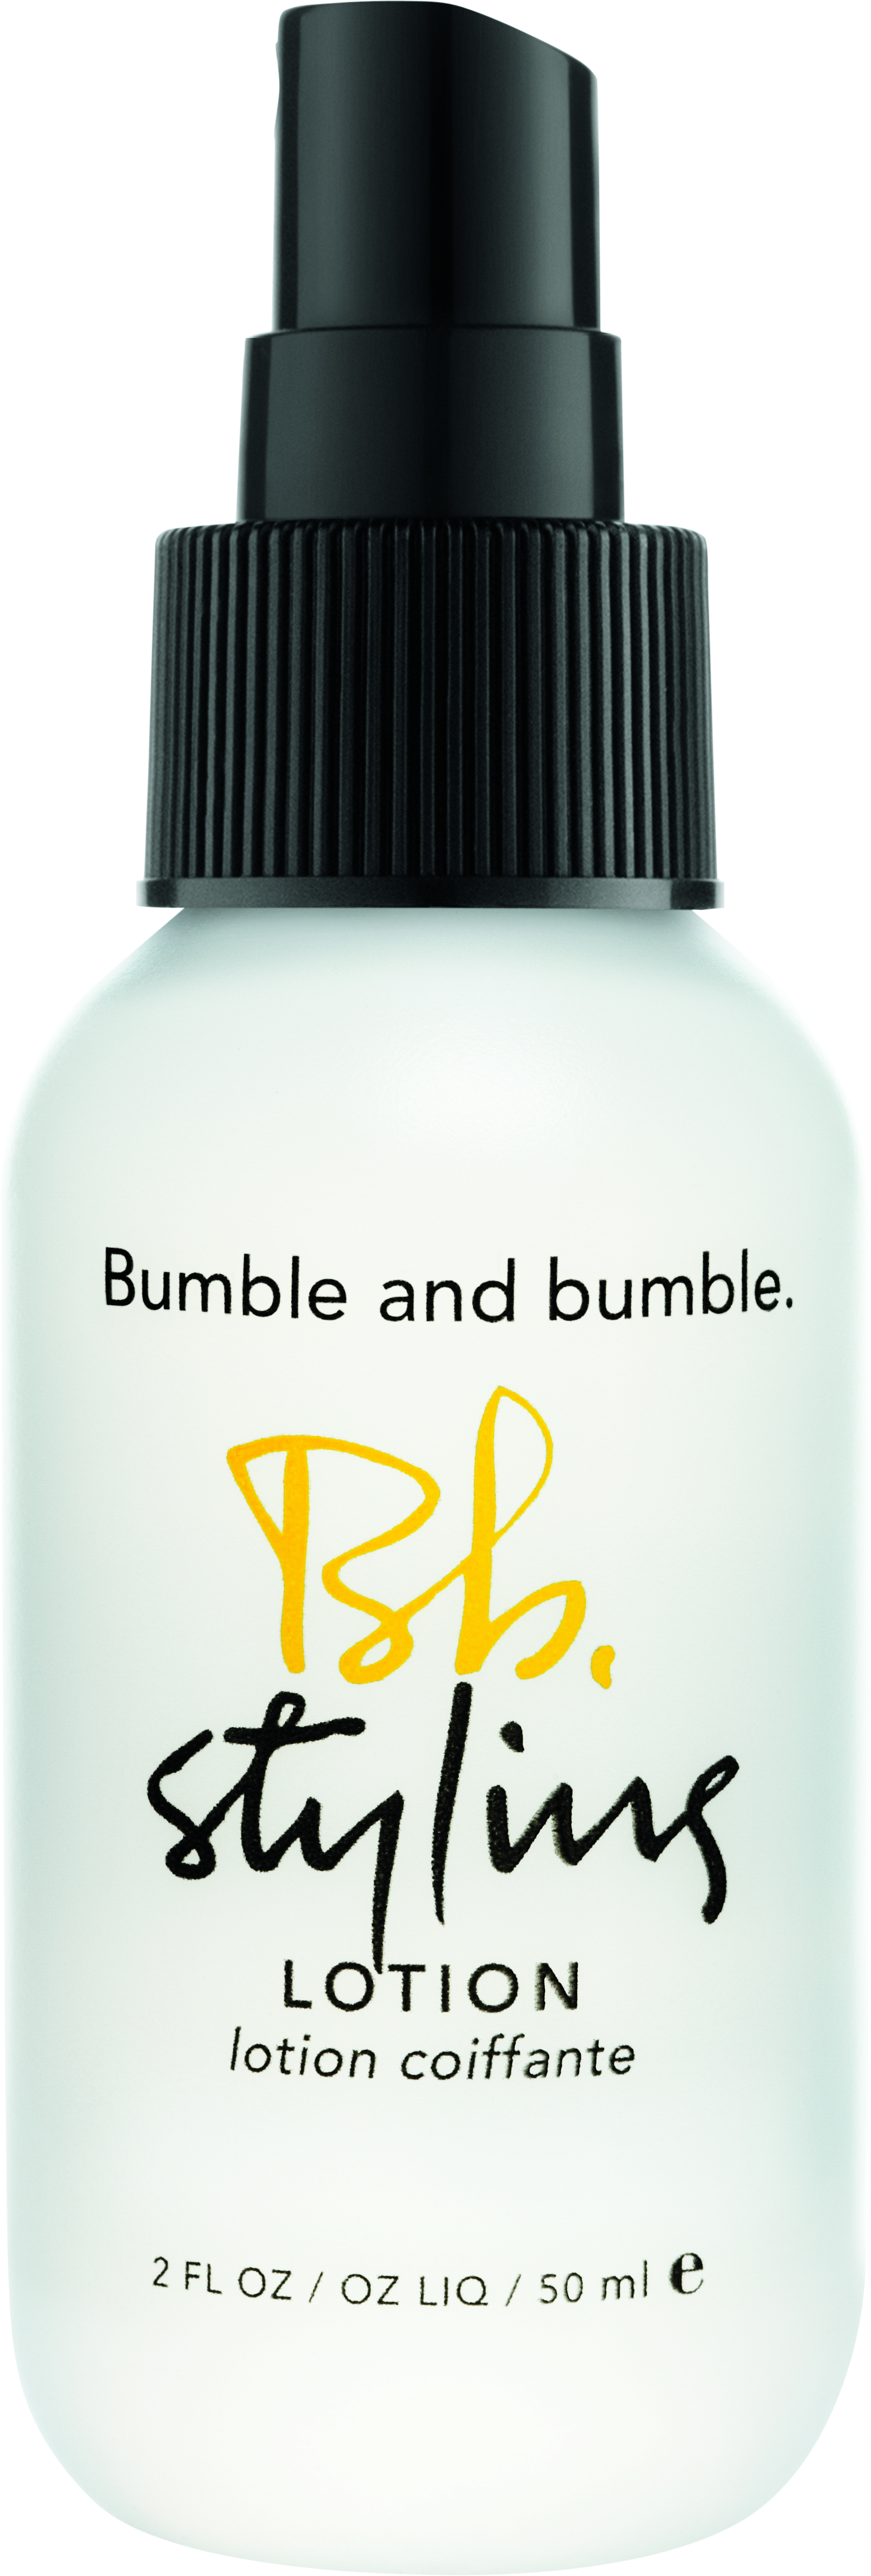 Bumble and bumble Styling Lotion 50ml